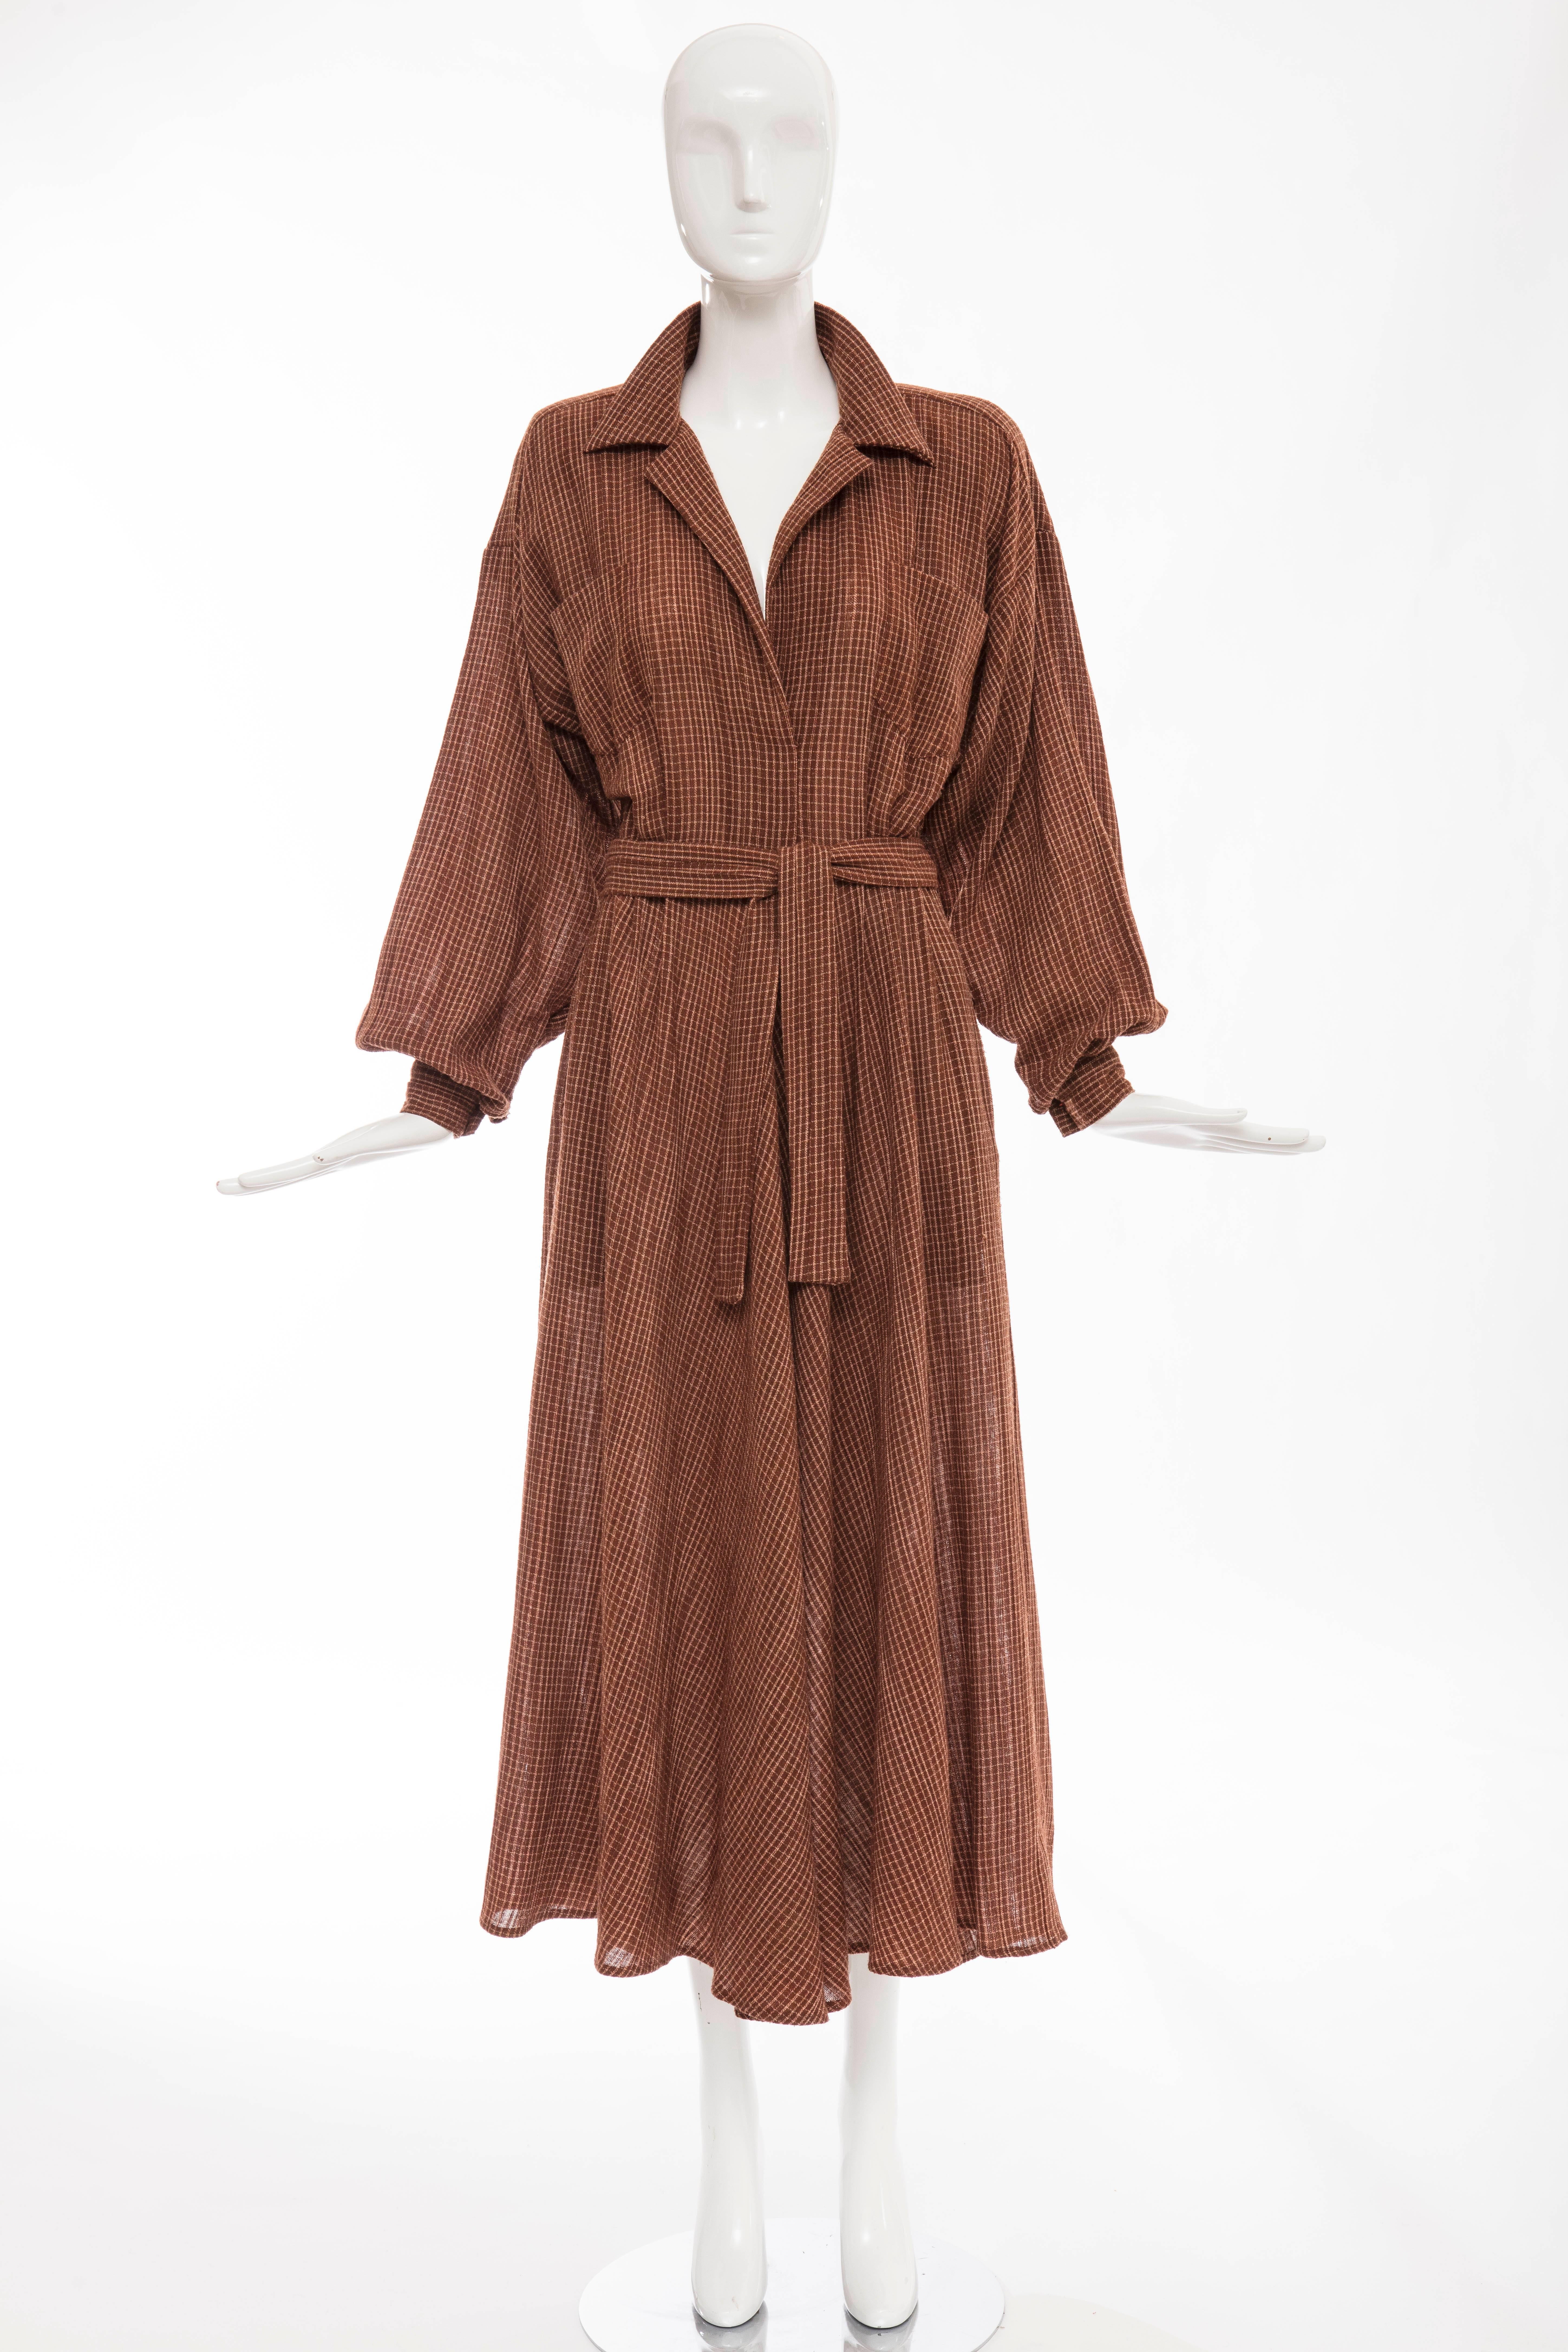 Norma Kamali, circa 1980's terracotta cotton gauze windowpane check dress, removable velcro shoulder pads, two front pockets with self belt and side zip.

US. 6

Bust 36, Waist 25, Hips 56, Length 51